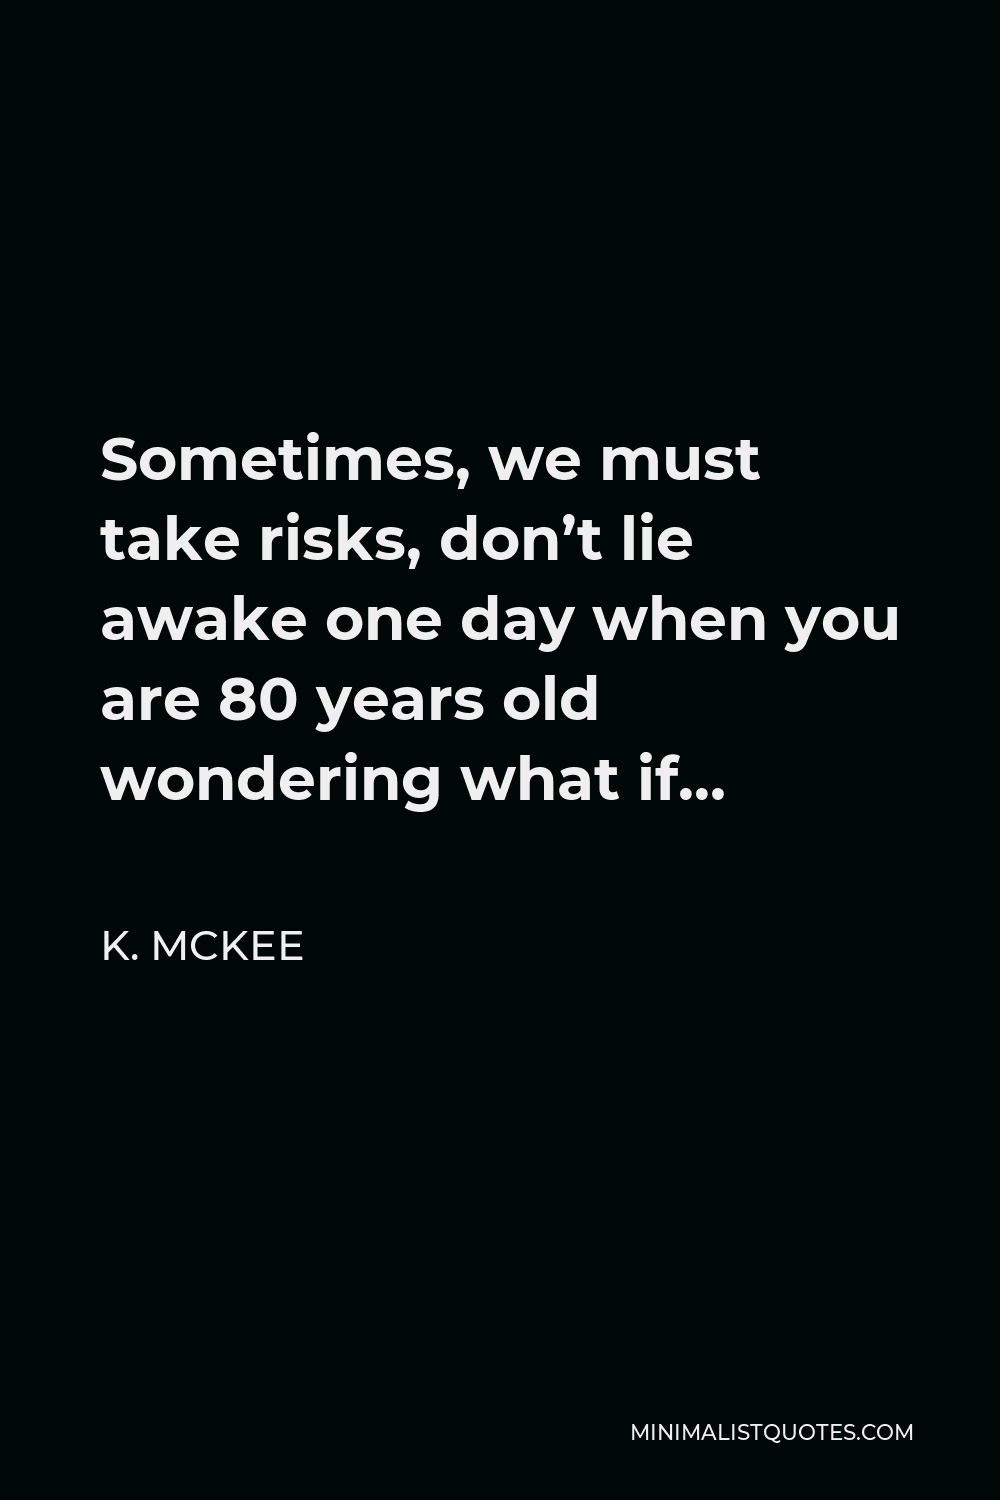 K. Mckee Quote - Sometimes, we must take risks, don’t lie awake one day when you are 80 years old wondering what if…